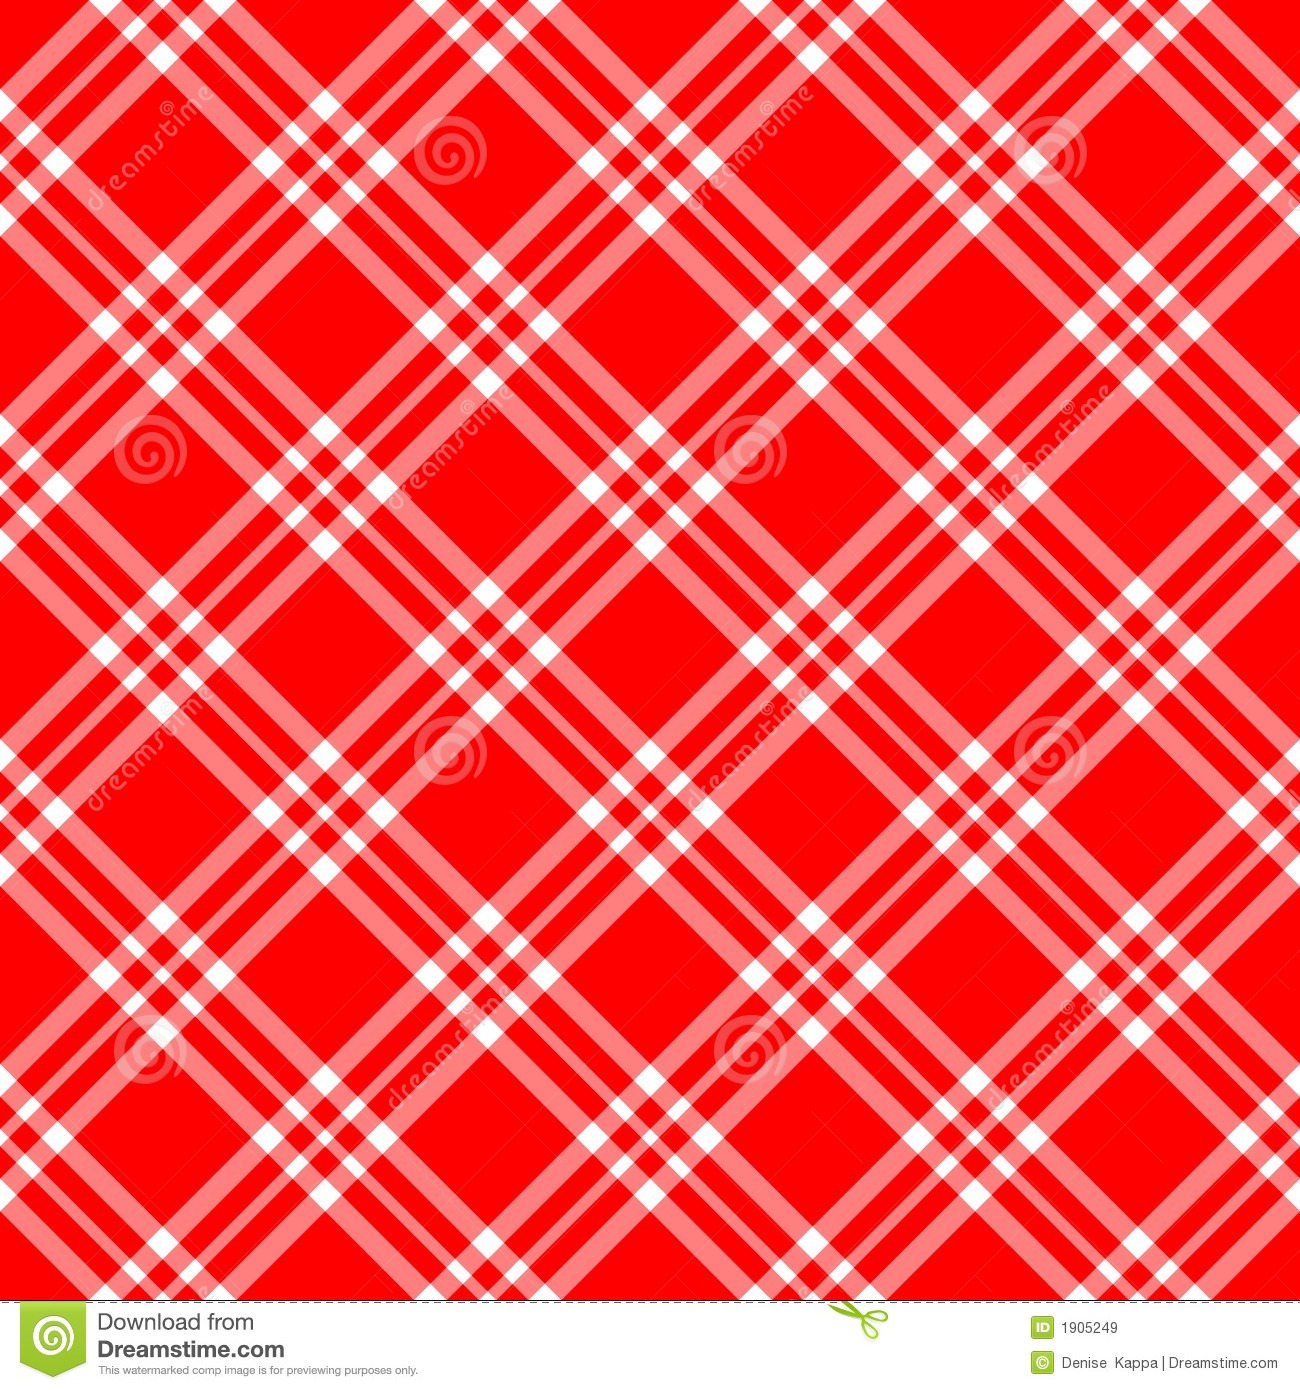 Red And White Checkered Background Red white plaid diagonal